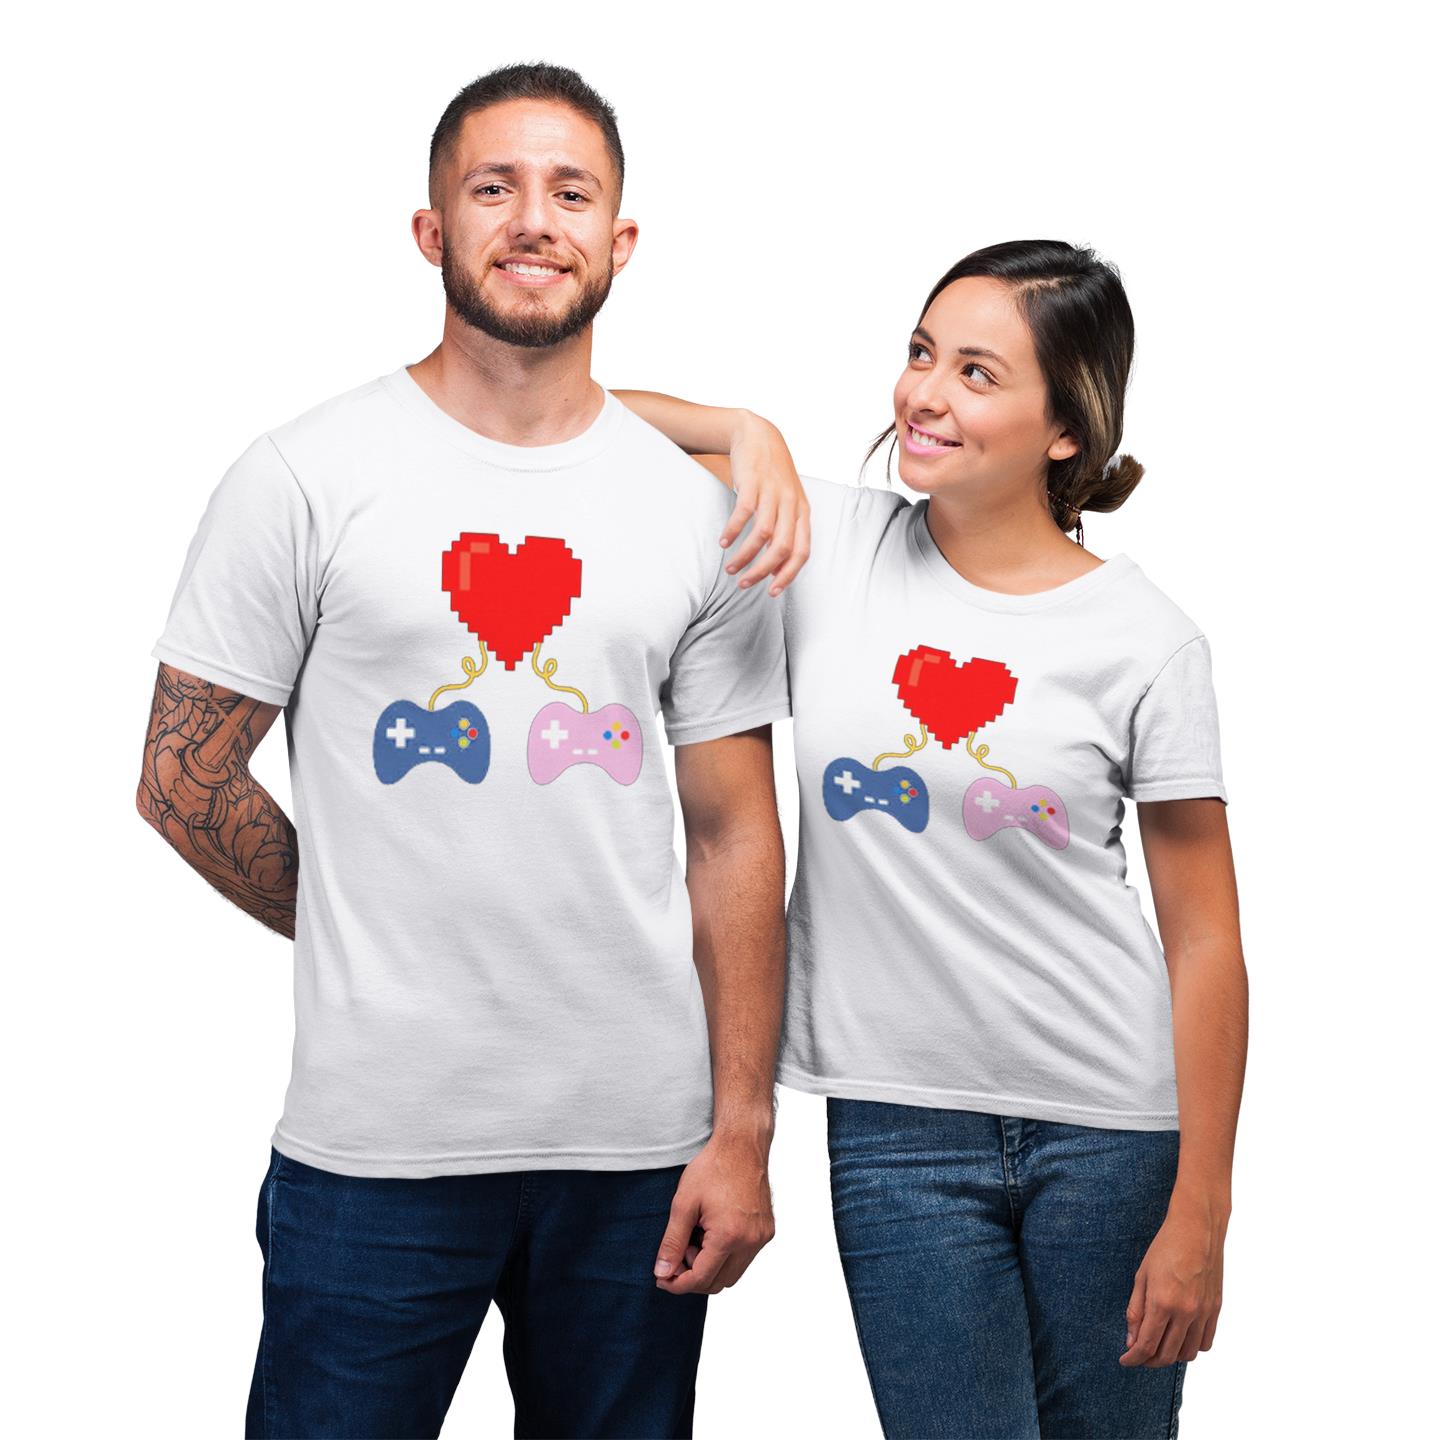 Gamer Connecting With Love Heart Shirt For Couples Lover Matching T-shirt